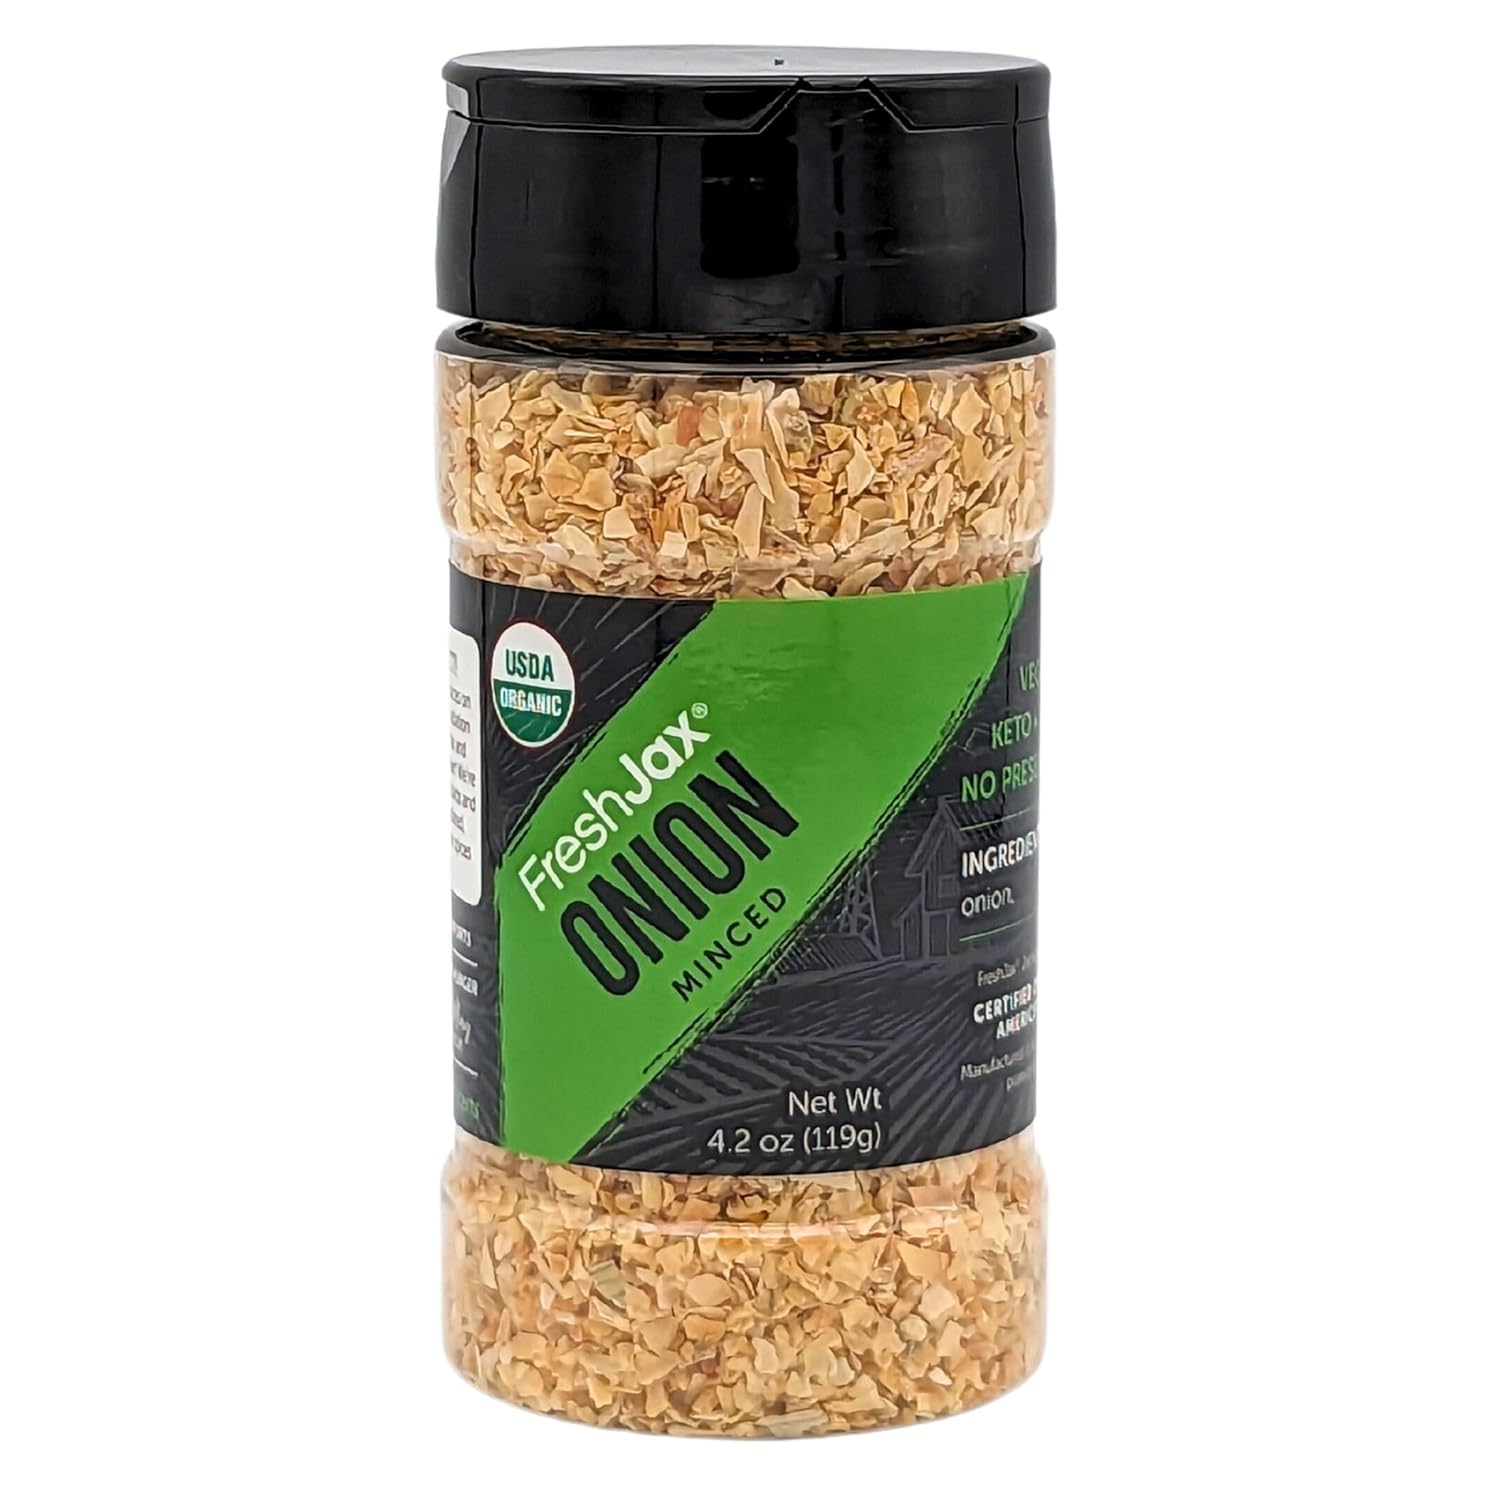 FreshJax Organic Minced Onion (4.2 oz Large Bottle) Non GMO, Gluten Free, Keto, Paleo, No Preservatives Dried Minced Onion Flakes for Cooking | Handcrafted in Jacksonville, Florida